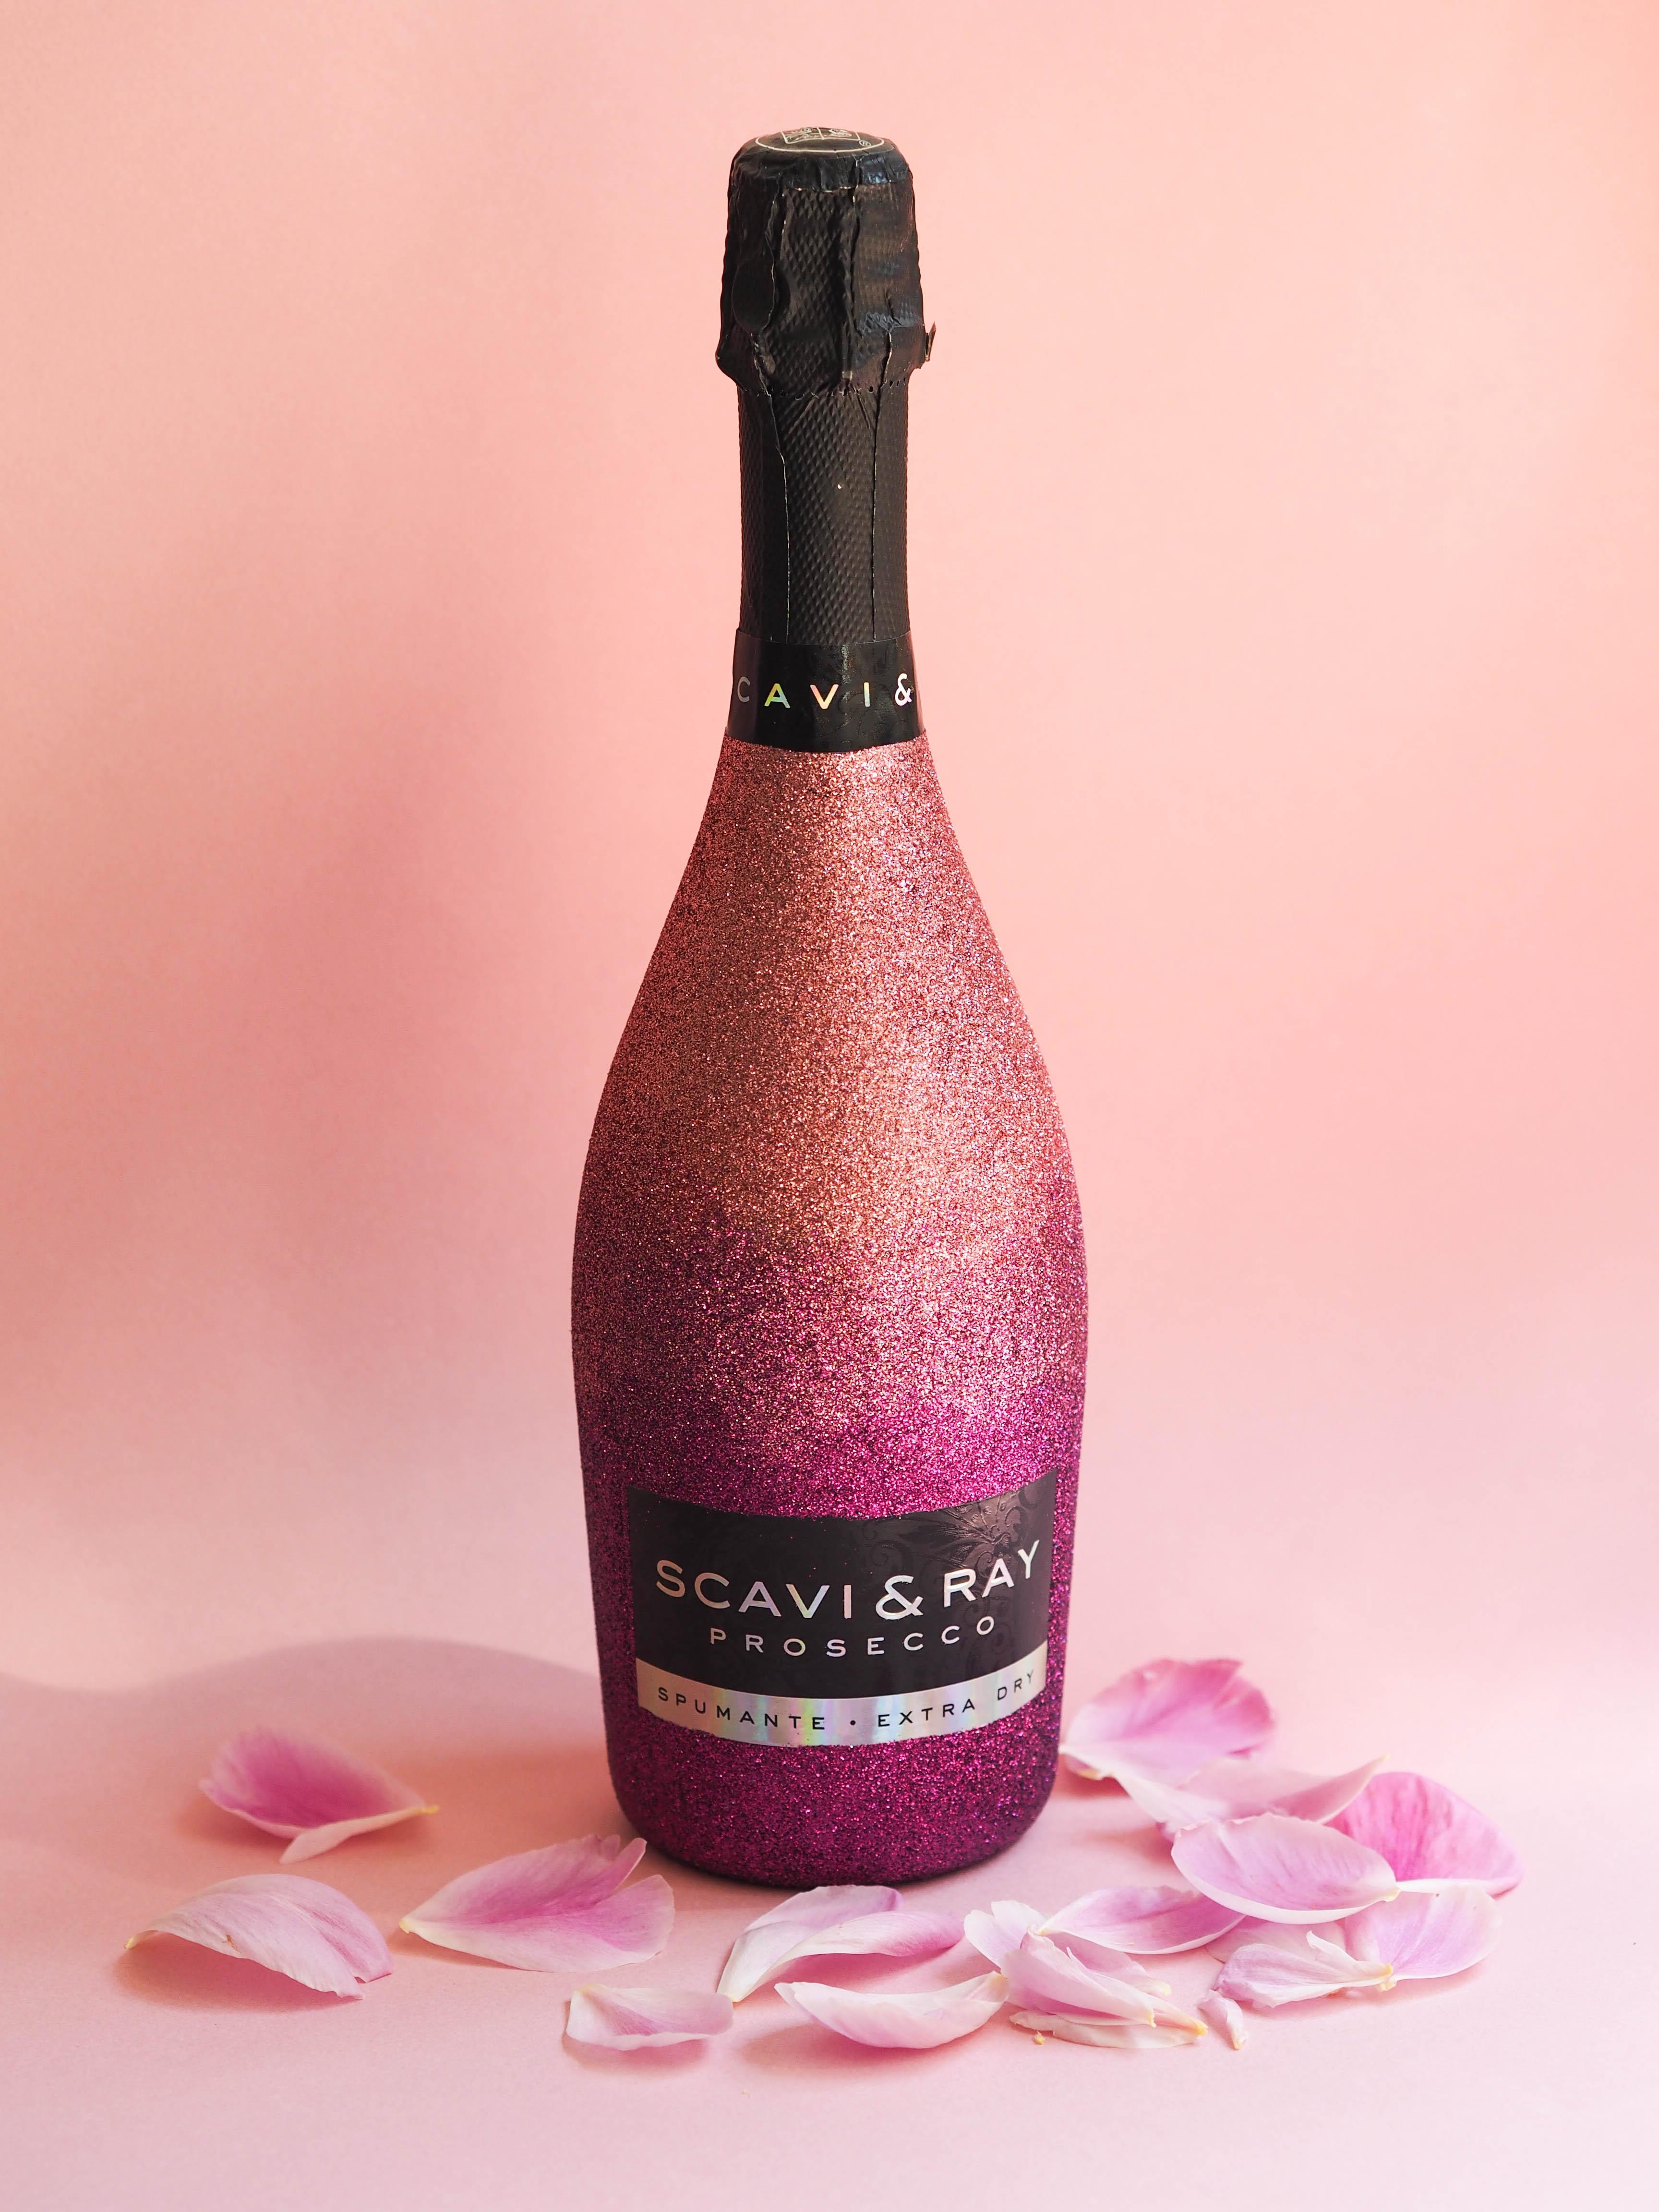 Let's sparkle! ✨ Den Scavi & Ray Prosecco gibt's auch in der Bling-Bling Edition! #lieblingsdrinks #scaviray
